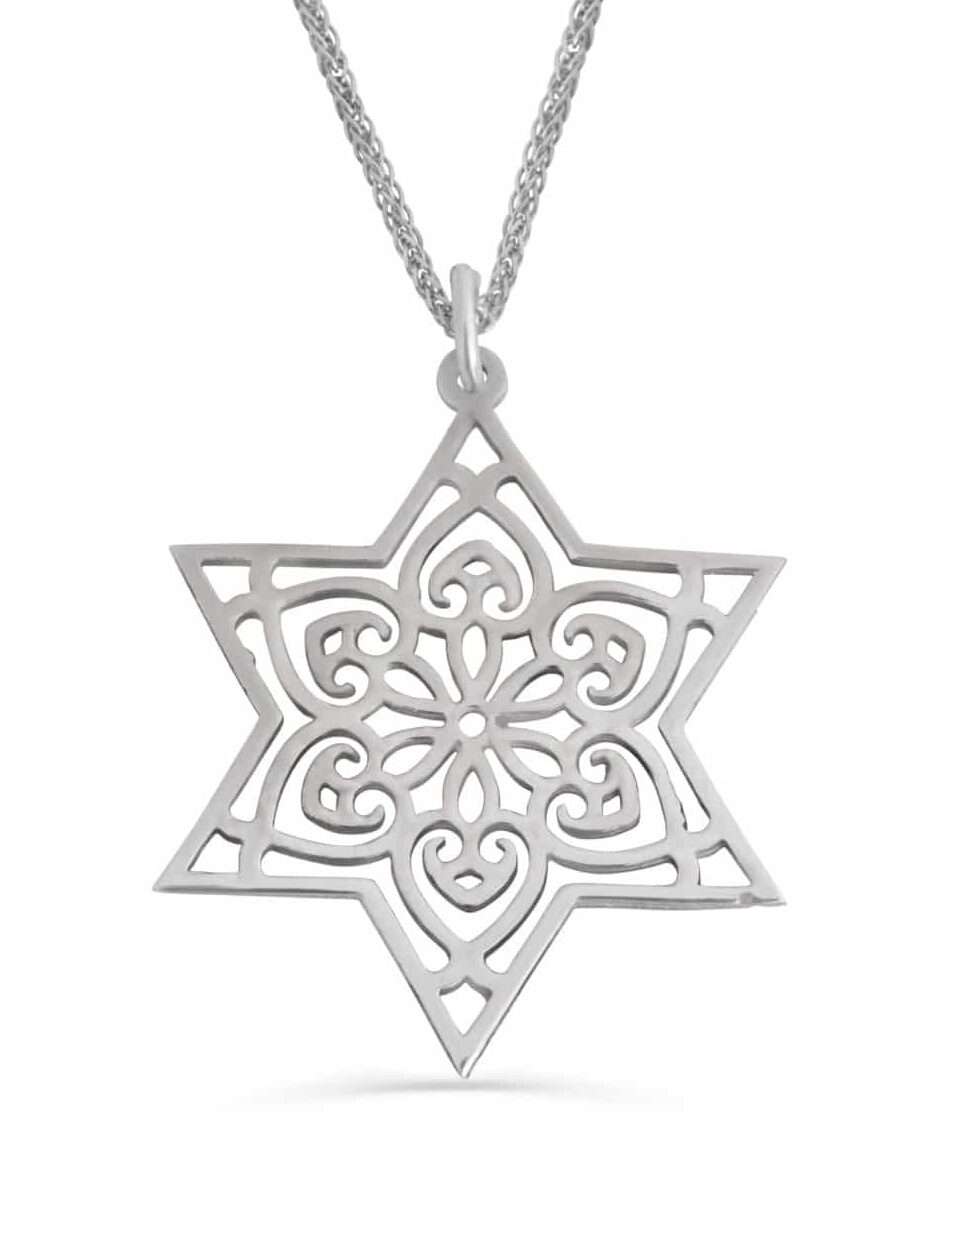 14K White Gold Star of David Necklace